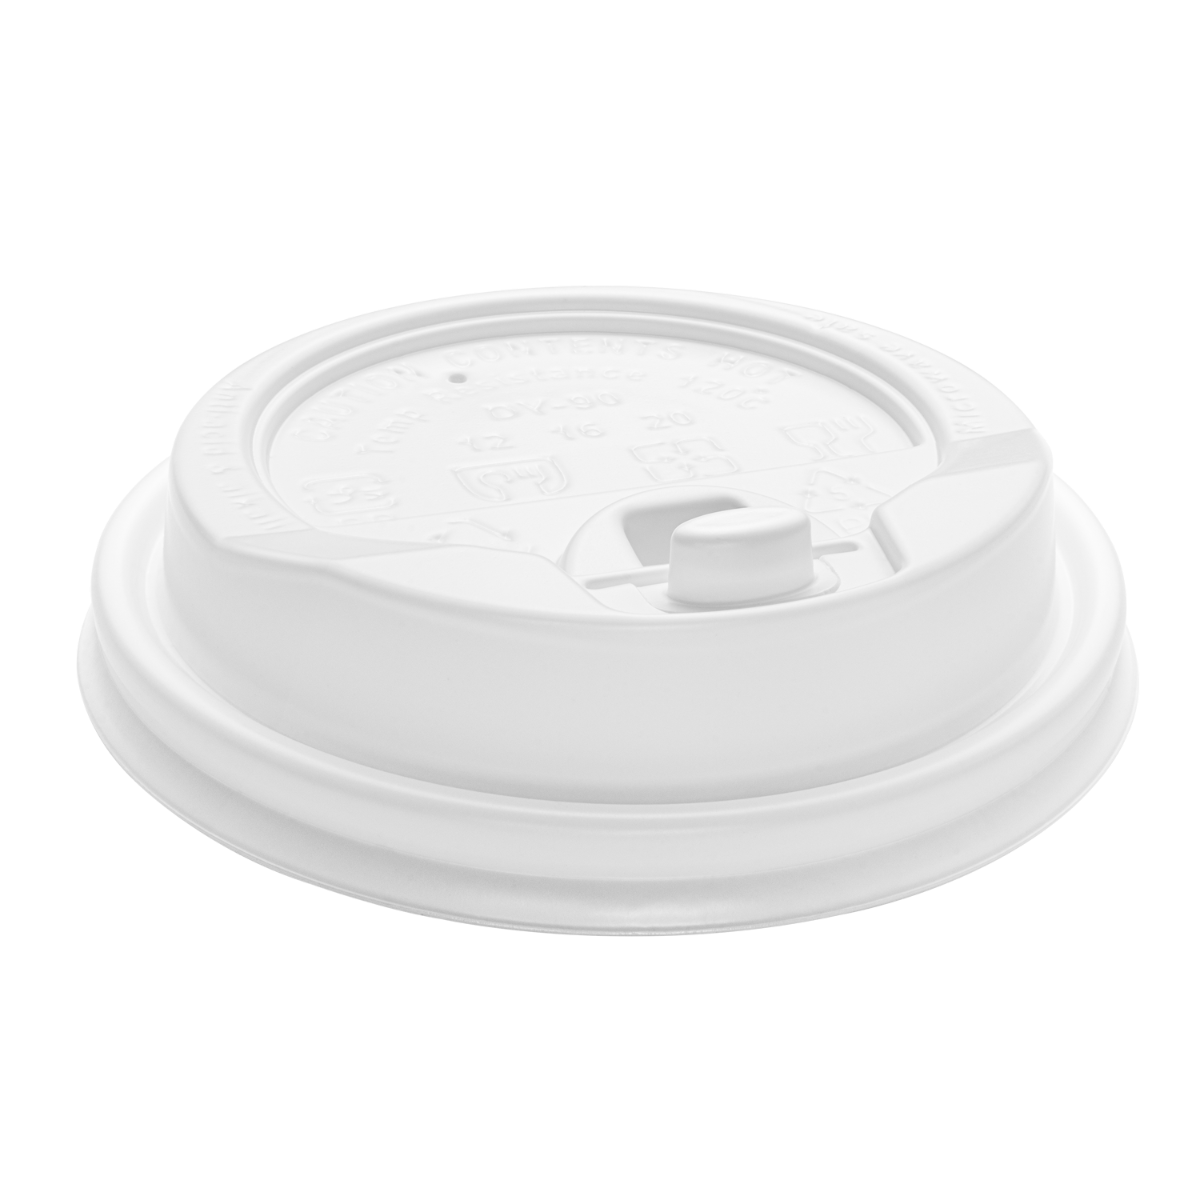 Enclosure Lids for 10-24 oz Insulated White Hot Drink Cups Recyclable Disposable 1000/case Black or White Lids